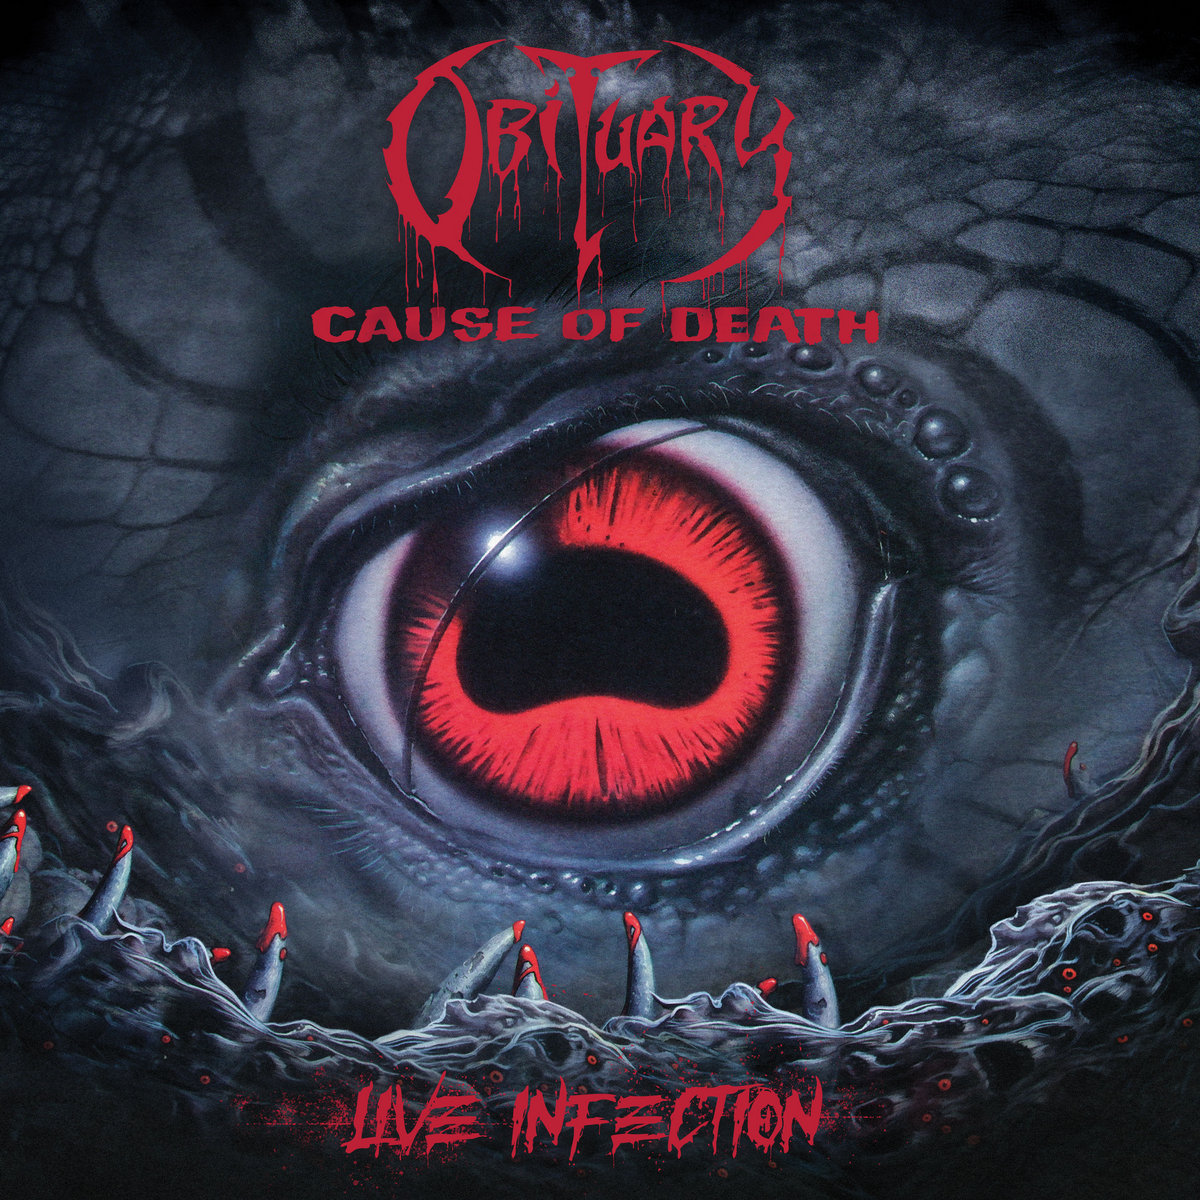 obituary – cause of death – live infection